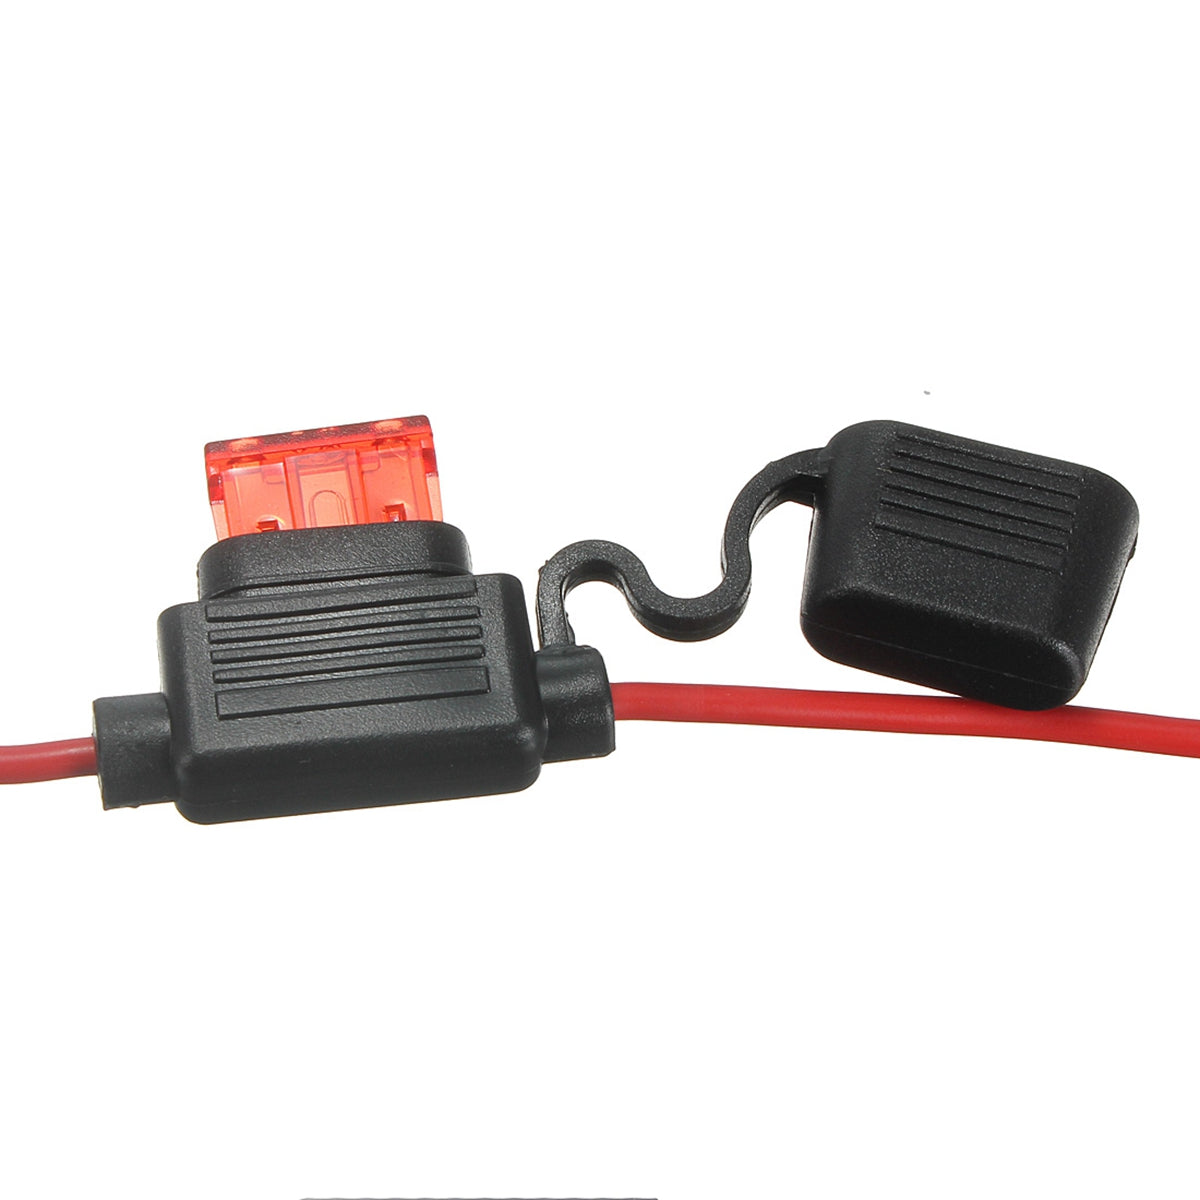 Salmon Car Fuse Holder Socket Blade Type In Line 6-32V with 10/15/20/30A Replacement Fuses Waterproof